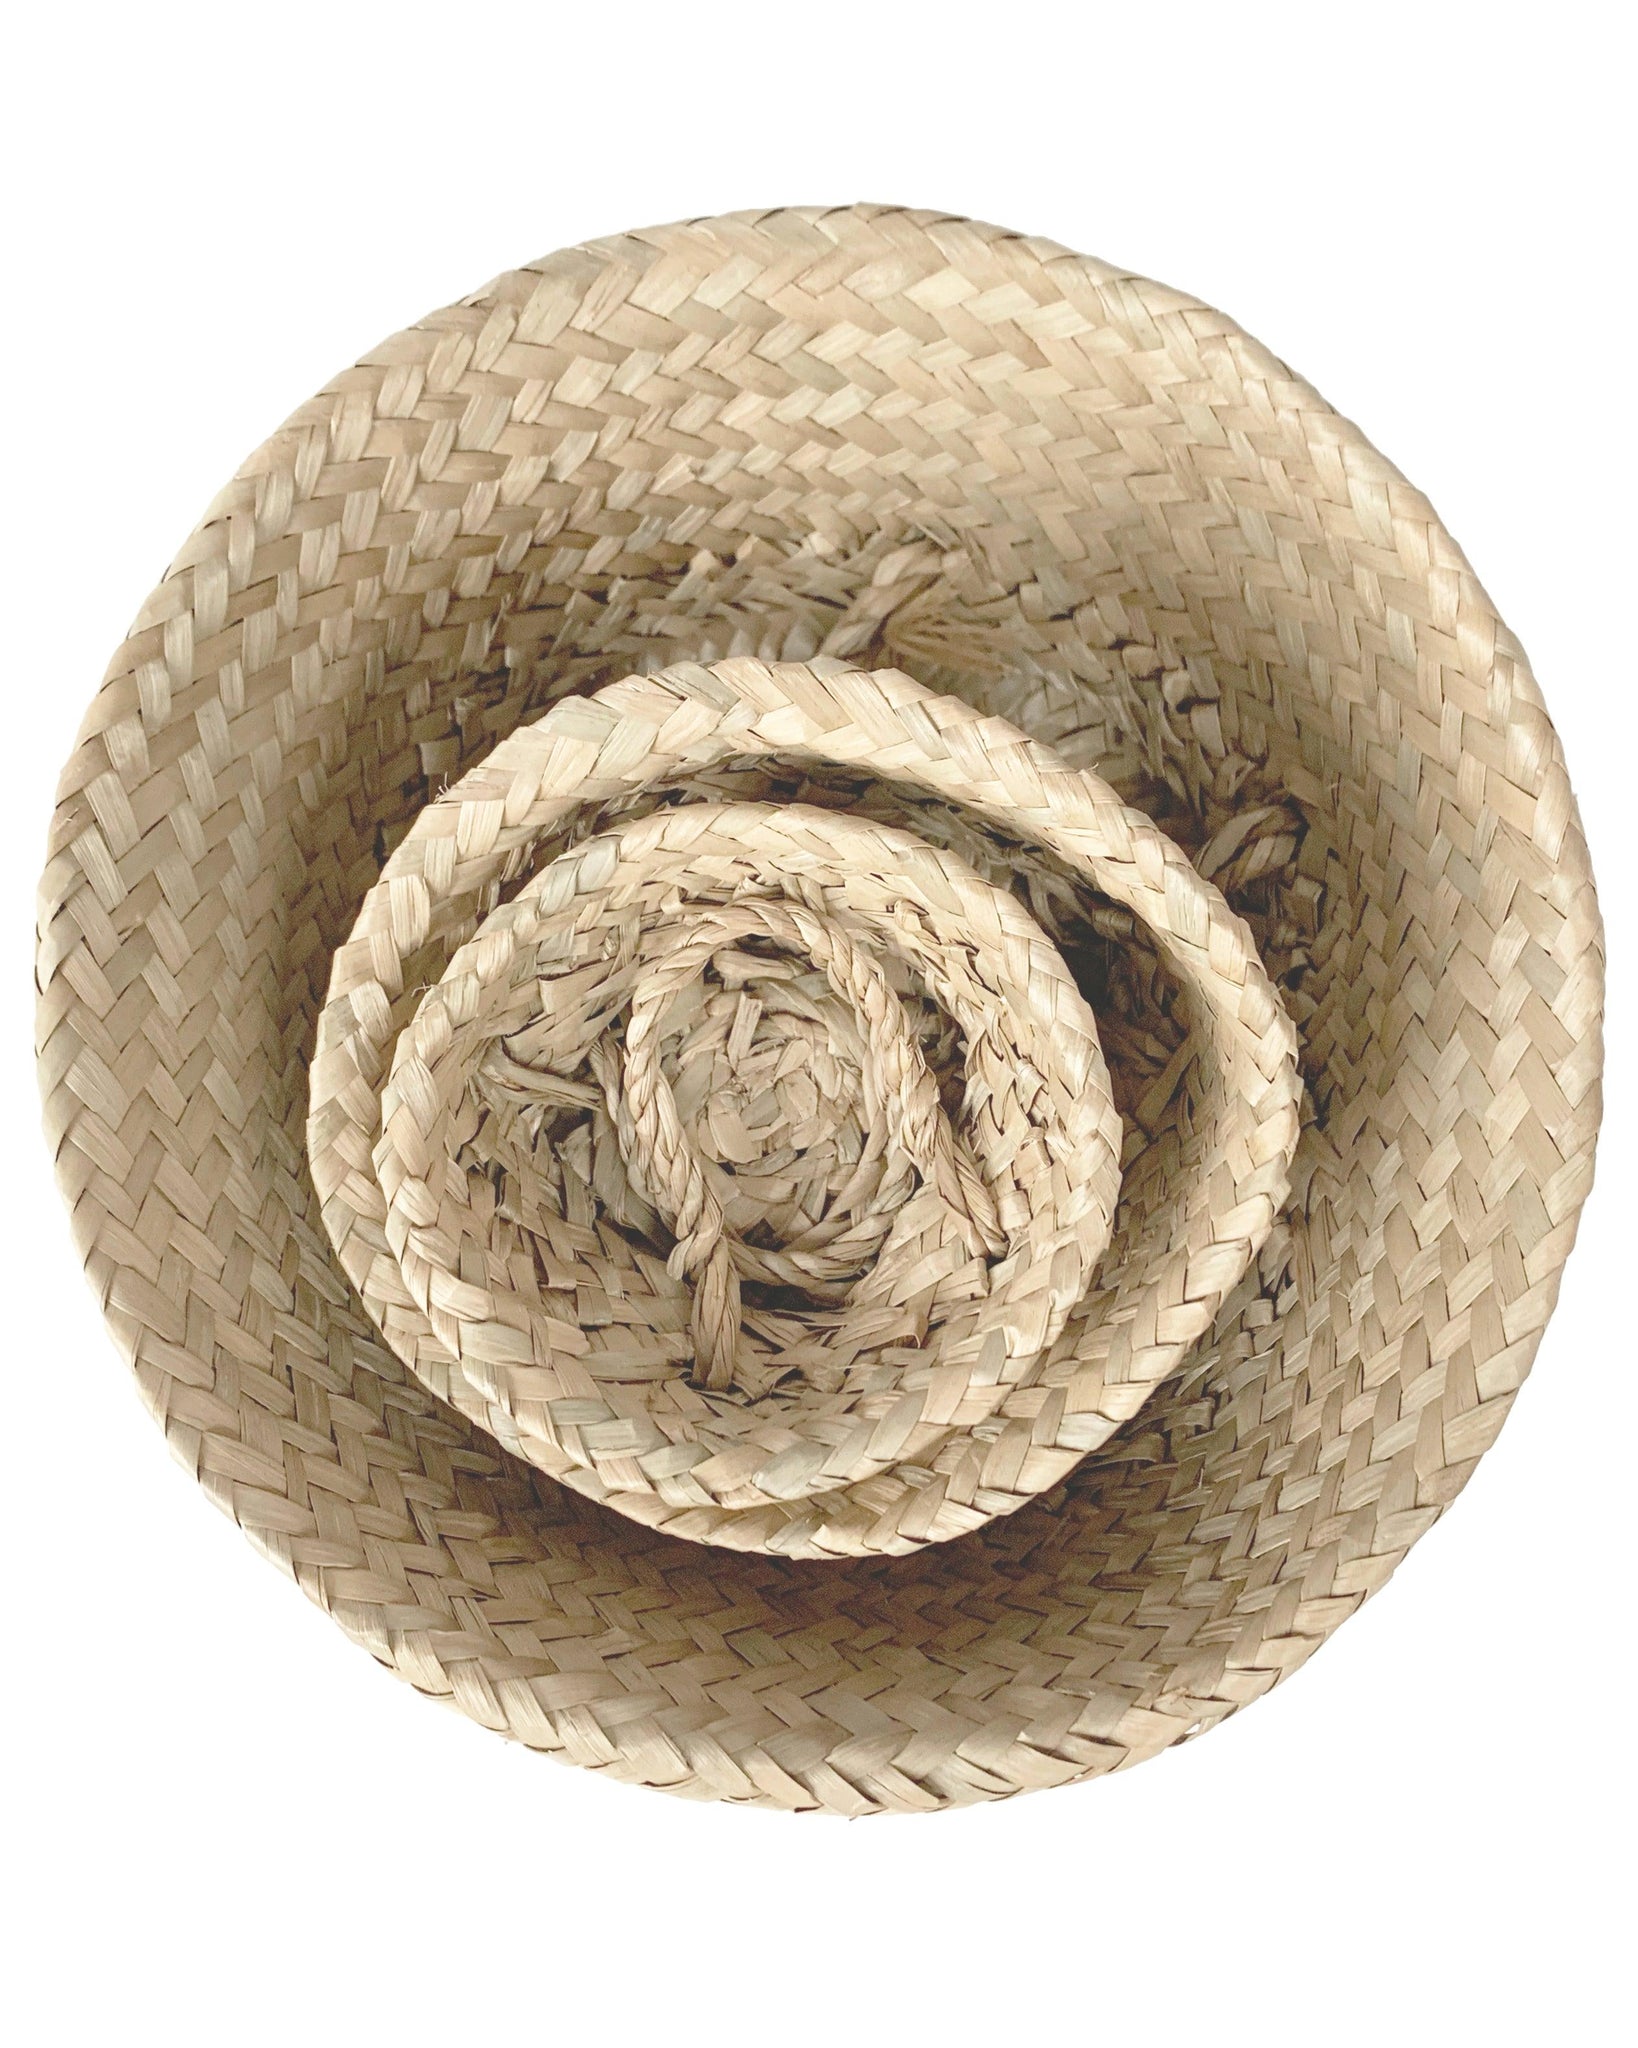 3 handwoven palm baskets stacked inside eachother